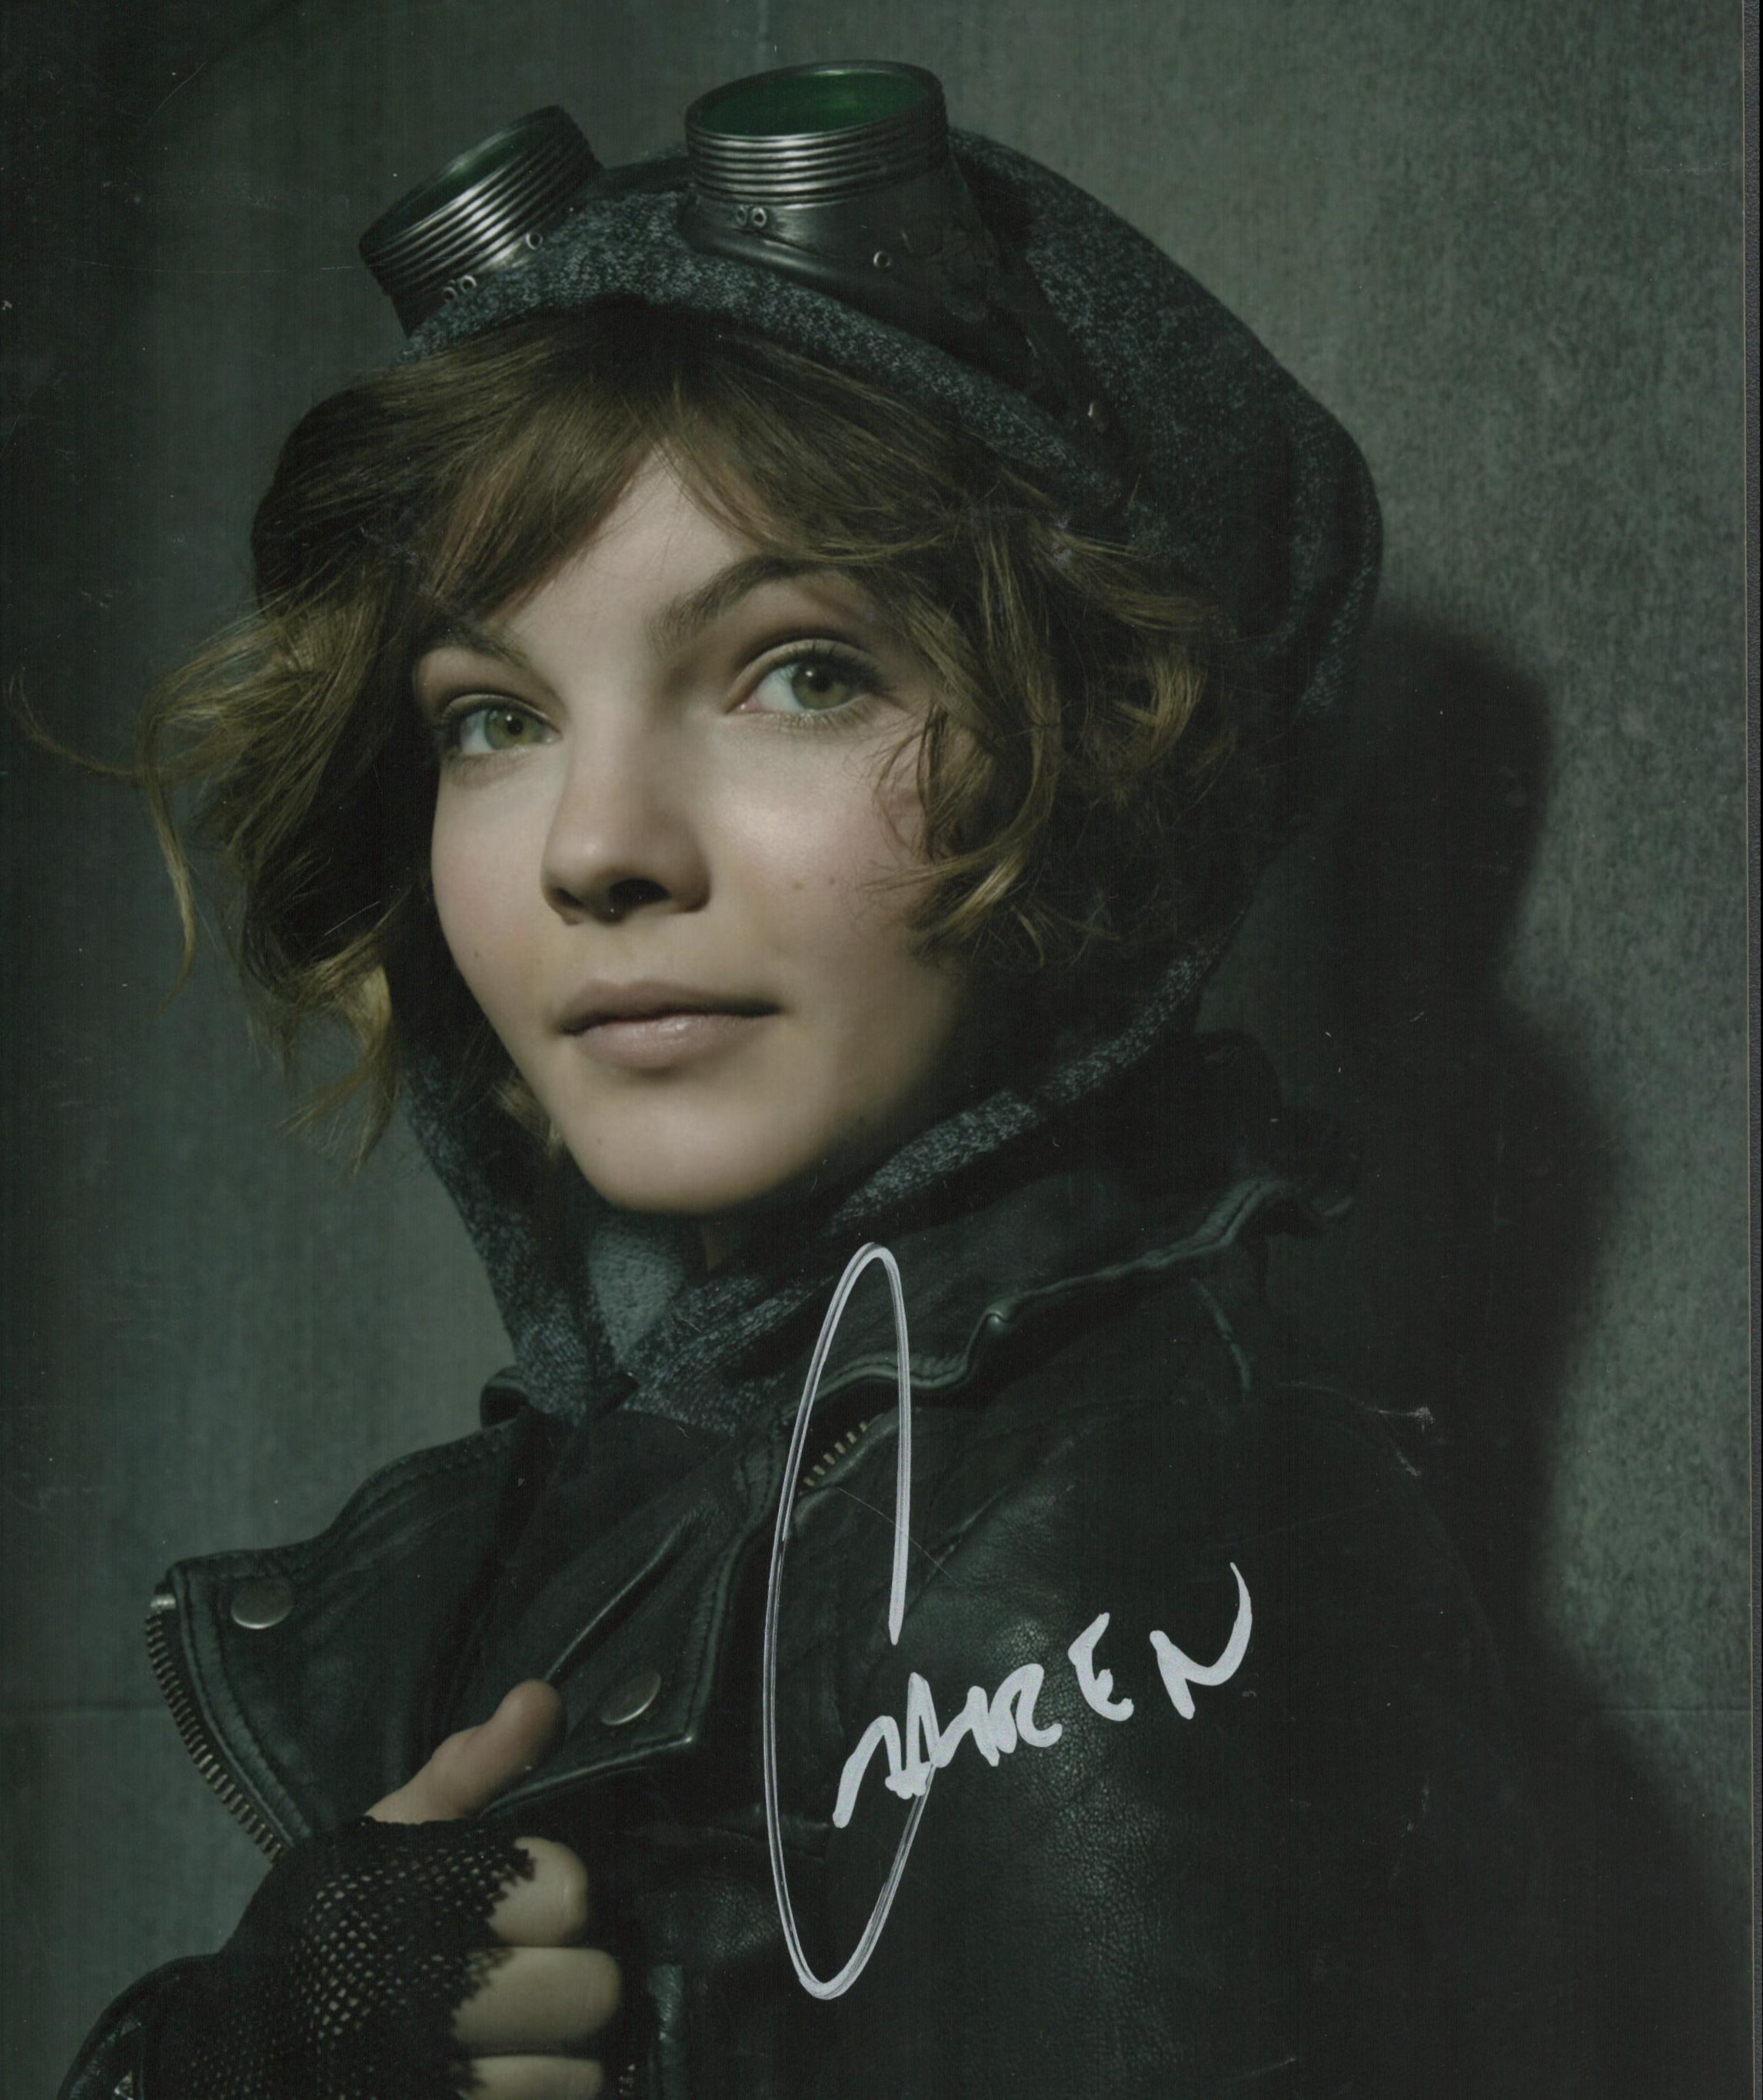 Camren Bicondova signed 10x8 inch colour photo. Good Condition. All autographs come with a